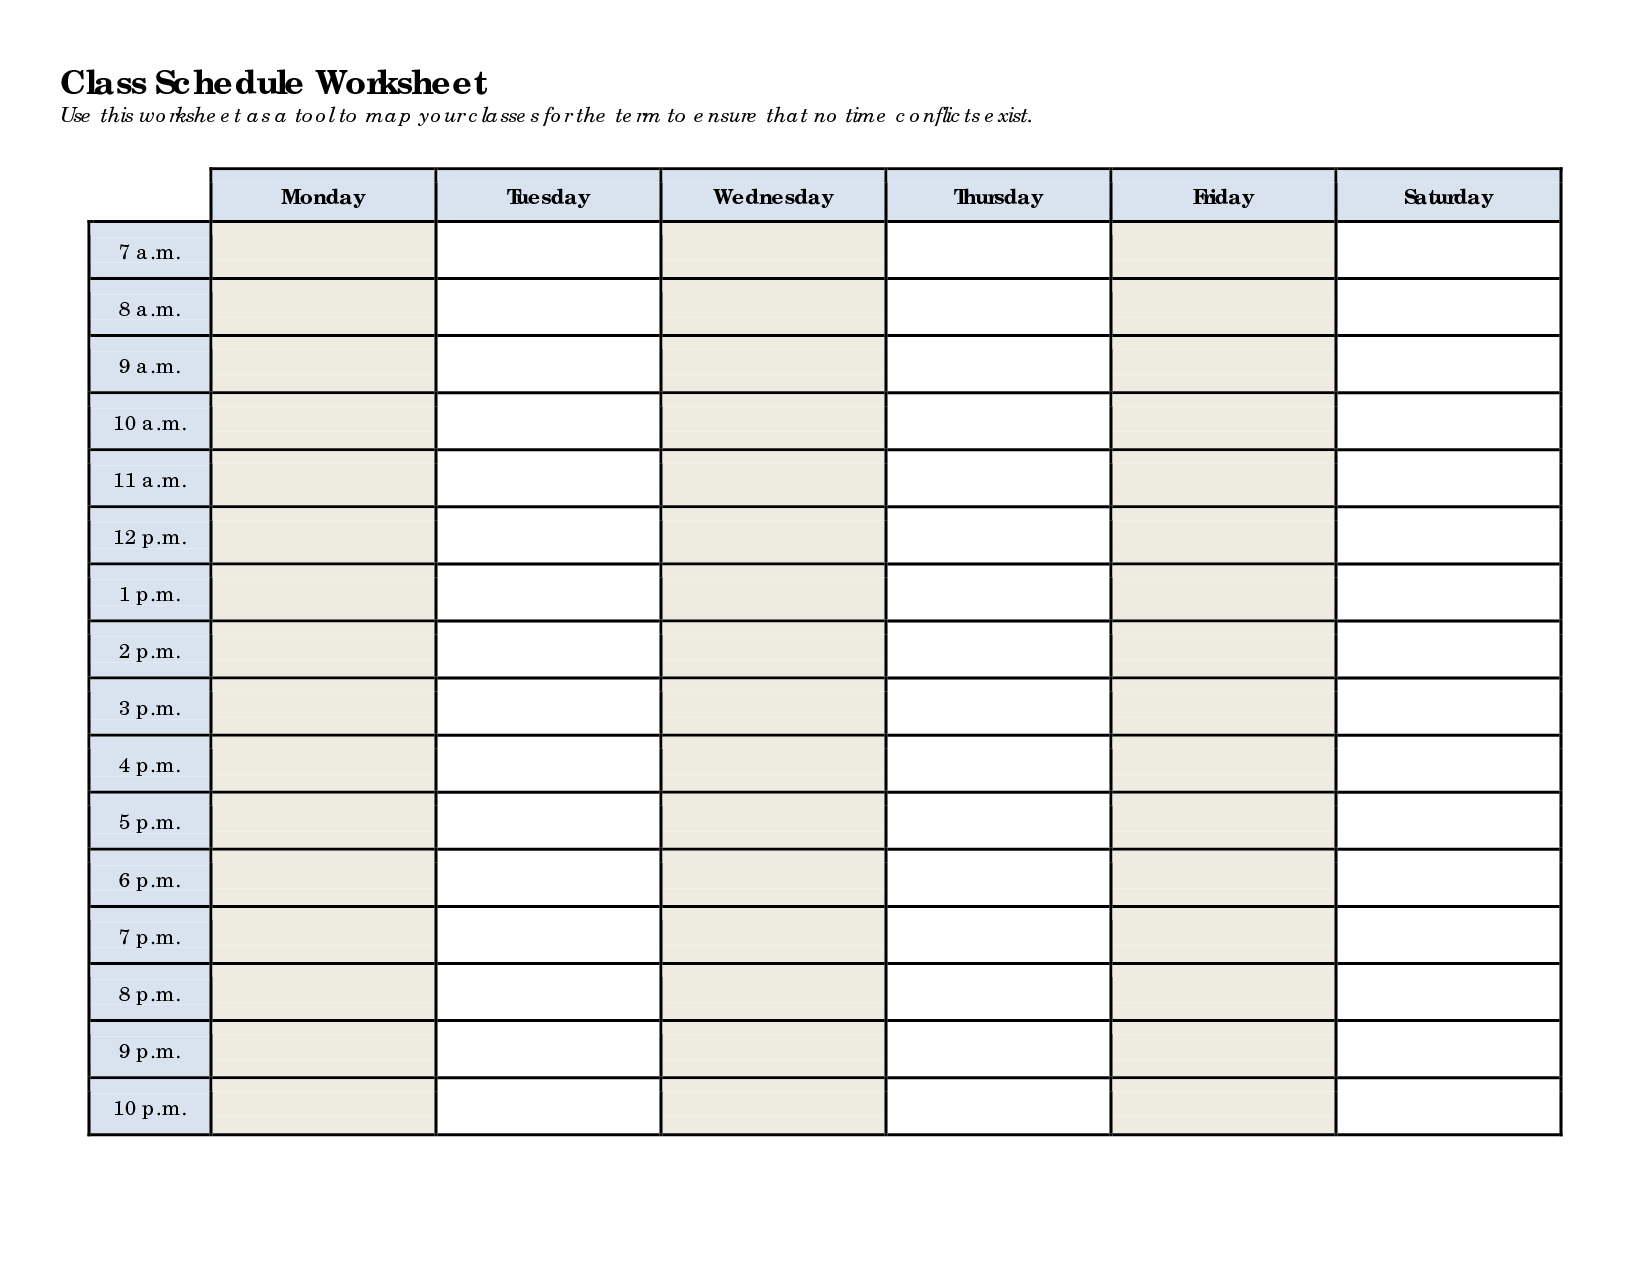 5 Best Images of Printable Blank Class Schedule - Weekly Class Schedule